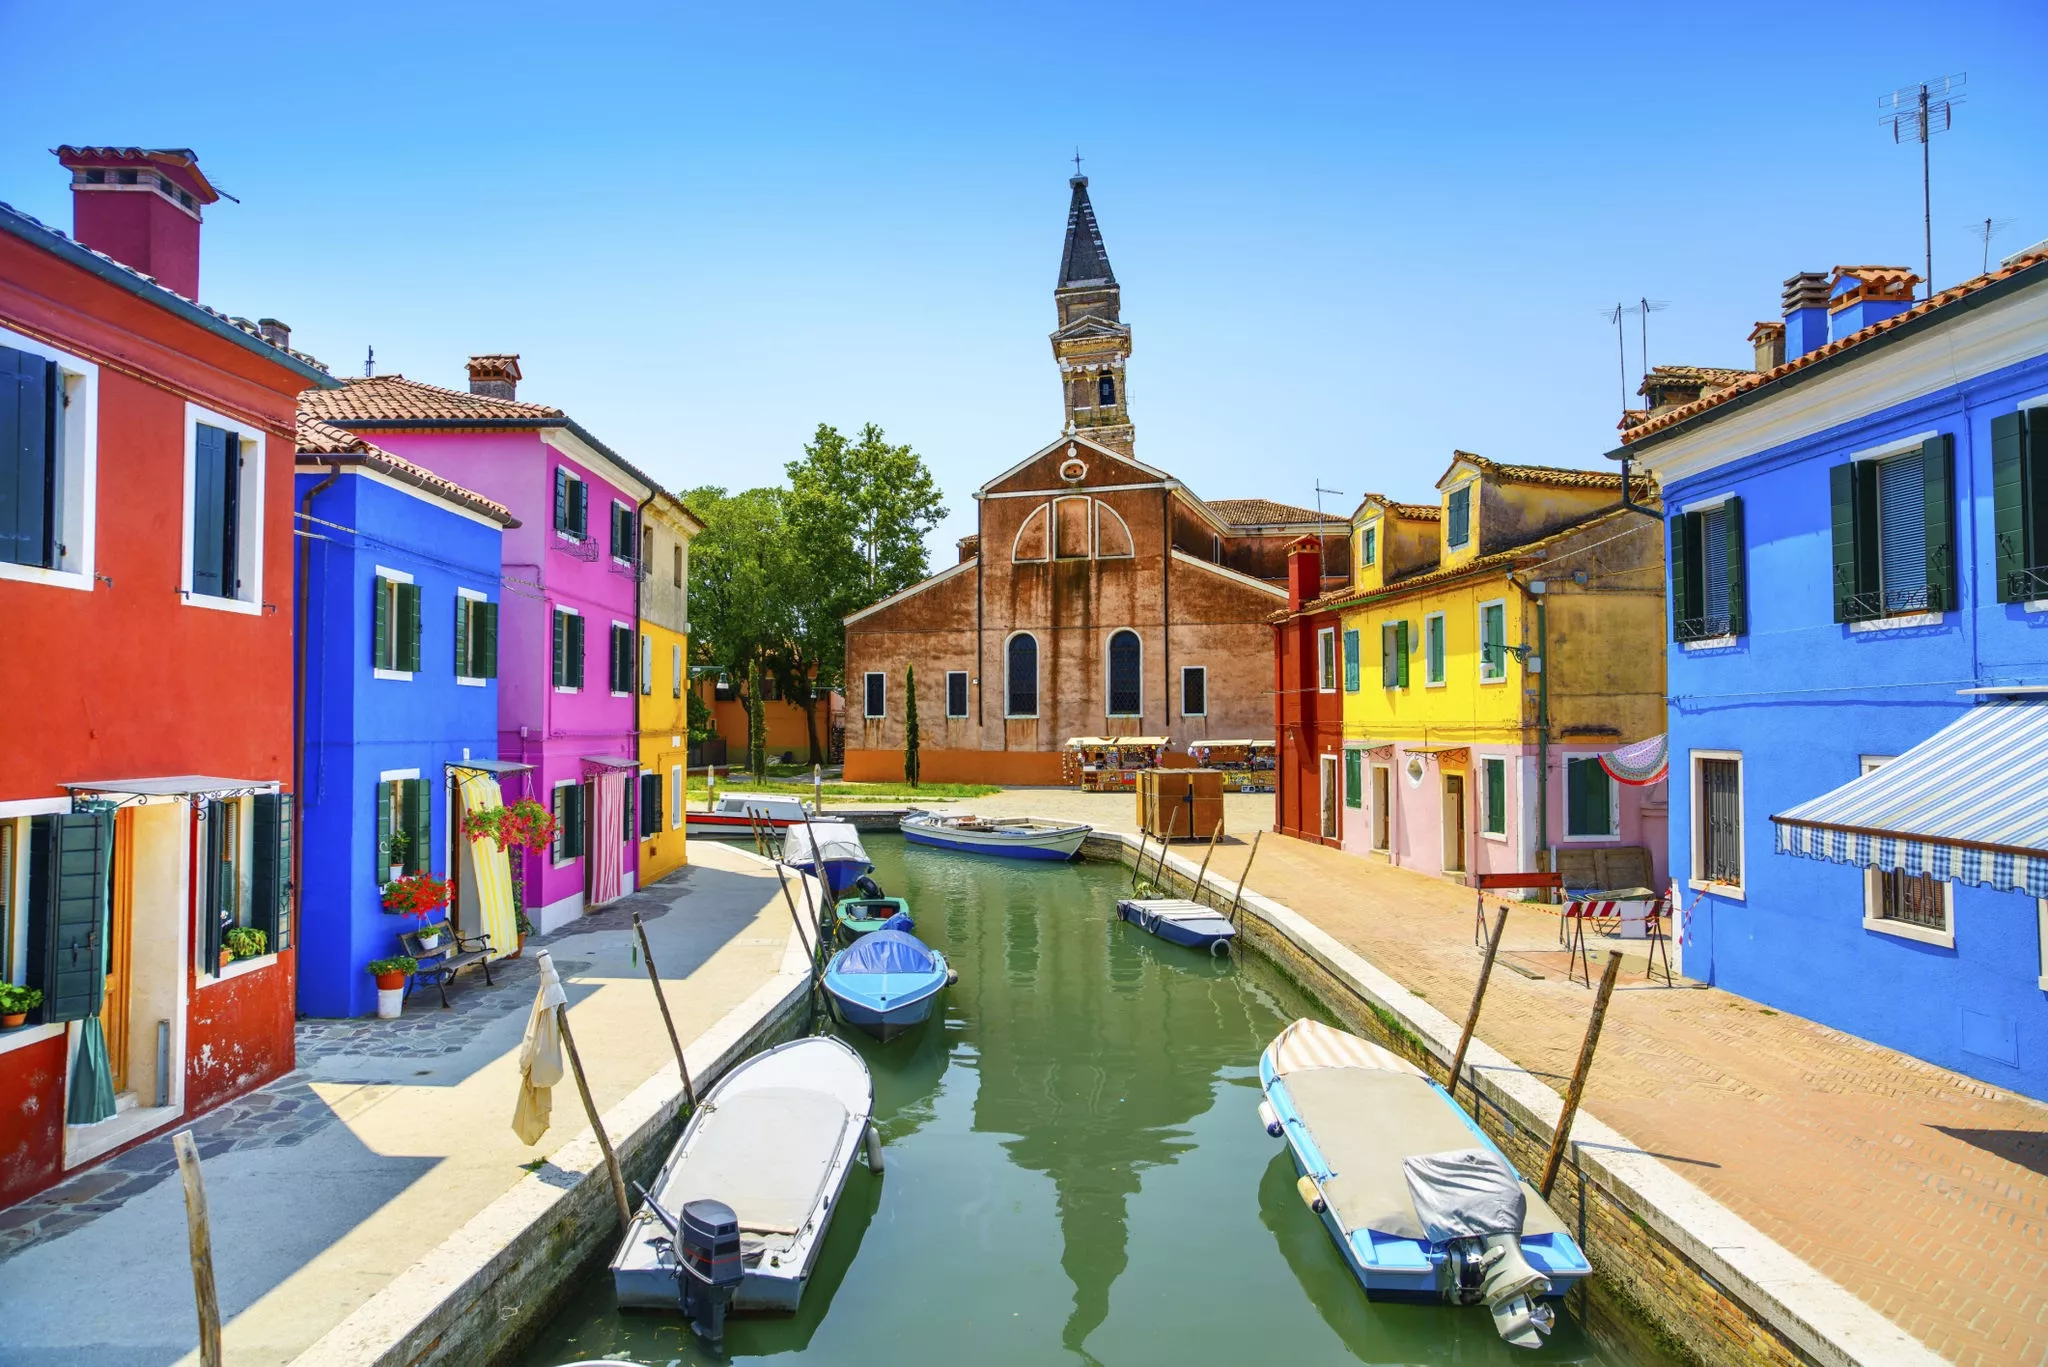 Burano in Italy, Europe | Architecture - Rated 4